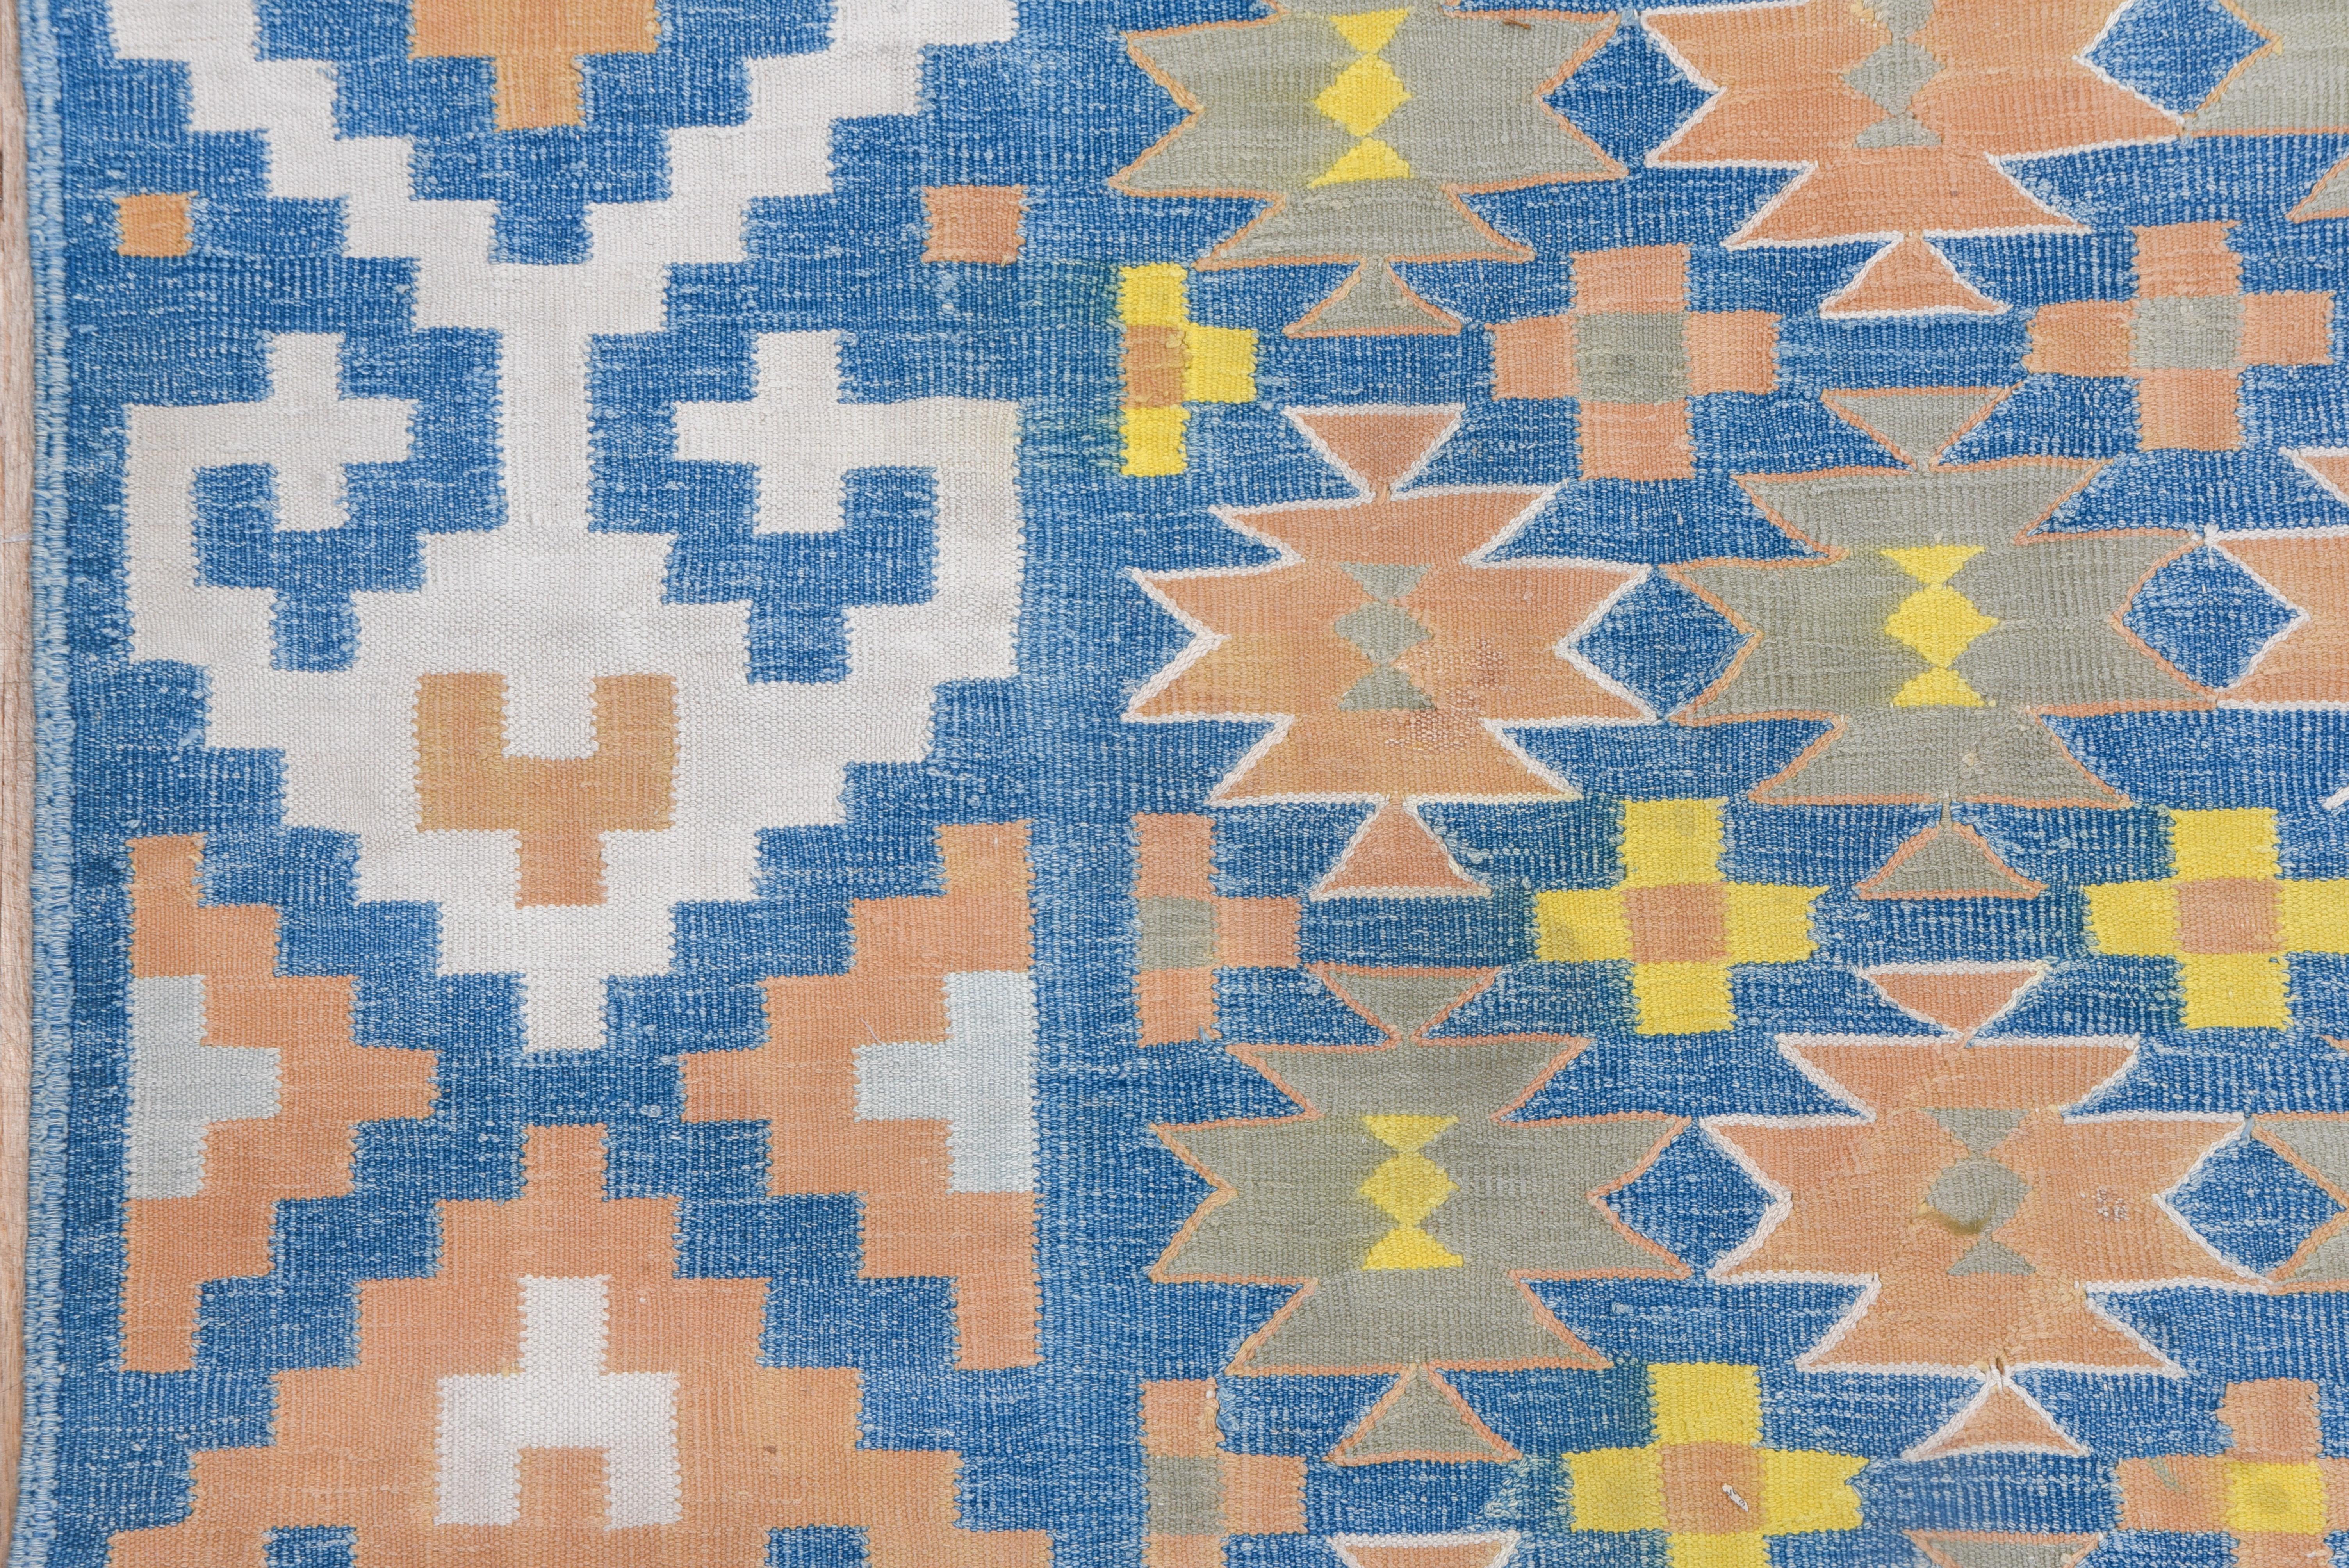 The luminous light/medium blue ground hosts rows and columns of small ashiks and small crosses, detailed in goldenrod, ecru, khaki and buff. Matching blue strip style order with off white and buff hexagons with arrowhead finials. Tapestry weave, all